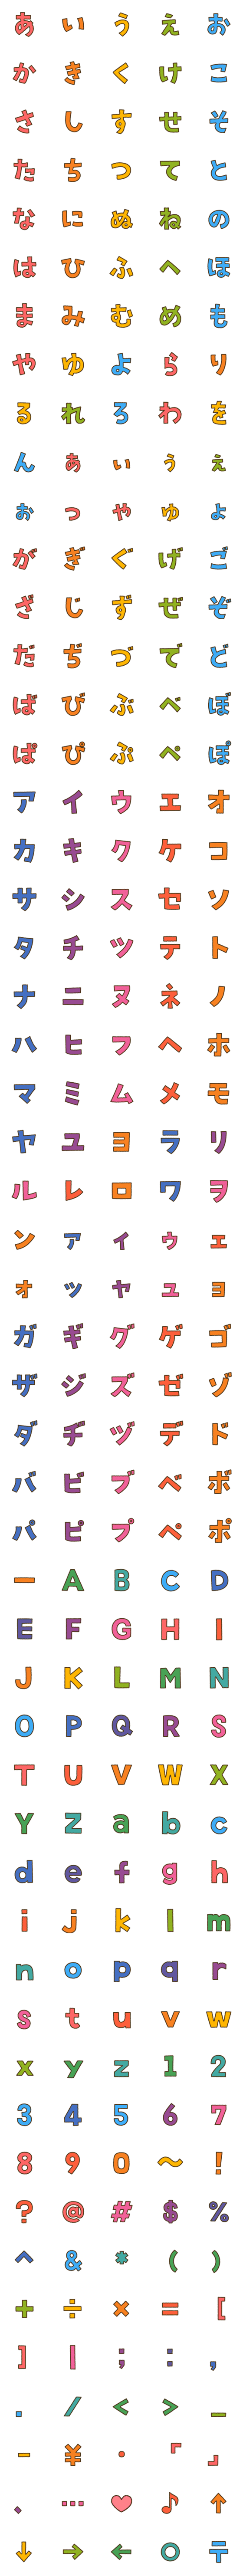 [LINE絵文字]便利なデコ文字セット【かな英数字】の画像一覧